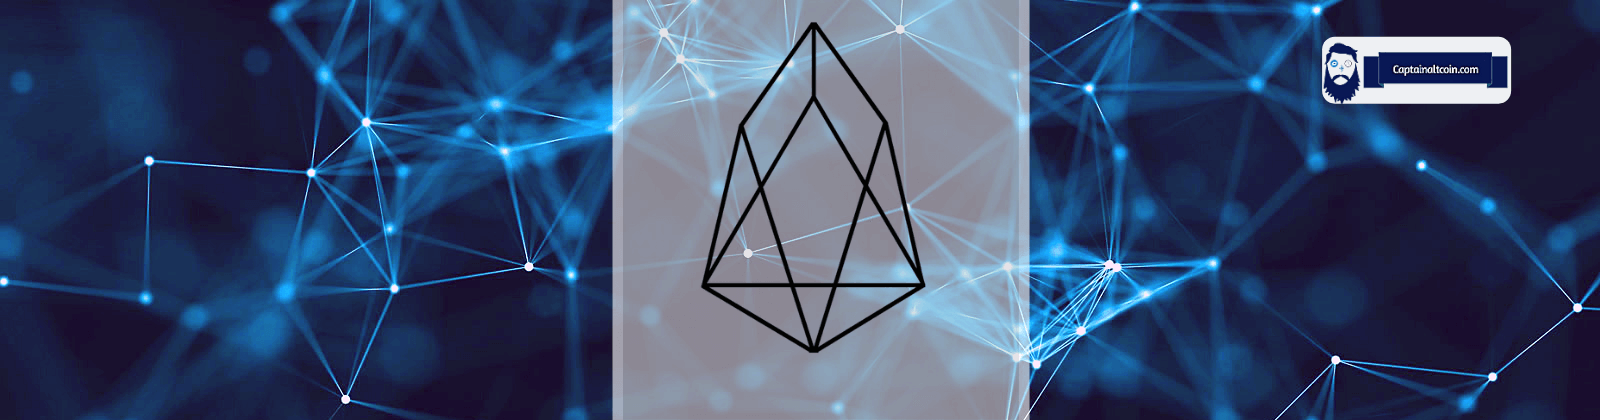 Eos Price Prediction 2022 -2030 | Is EOS a Good Investment?